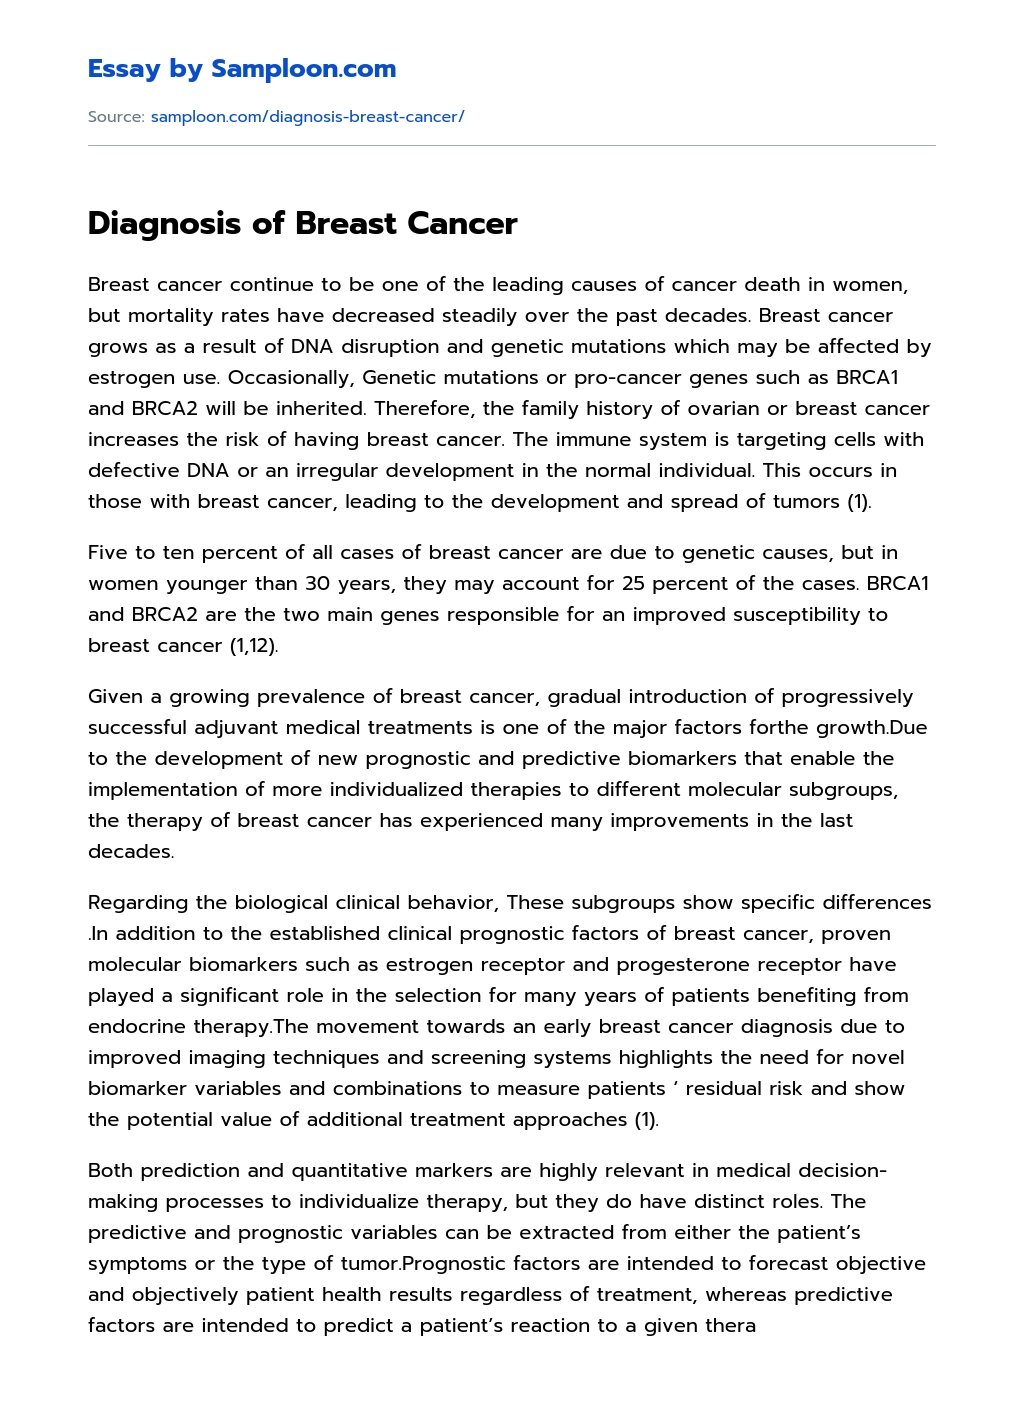 Diagnosis of Breast Cancer essay